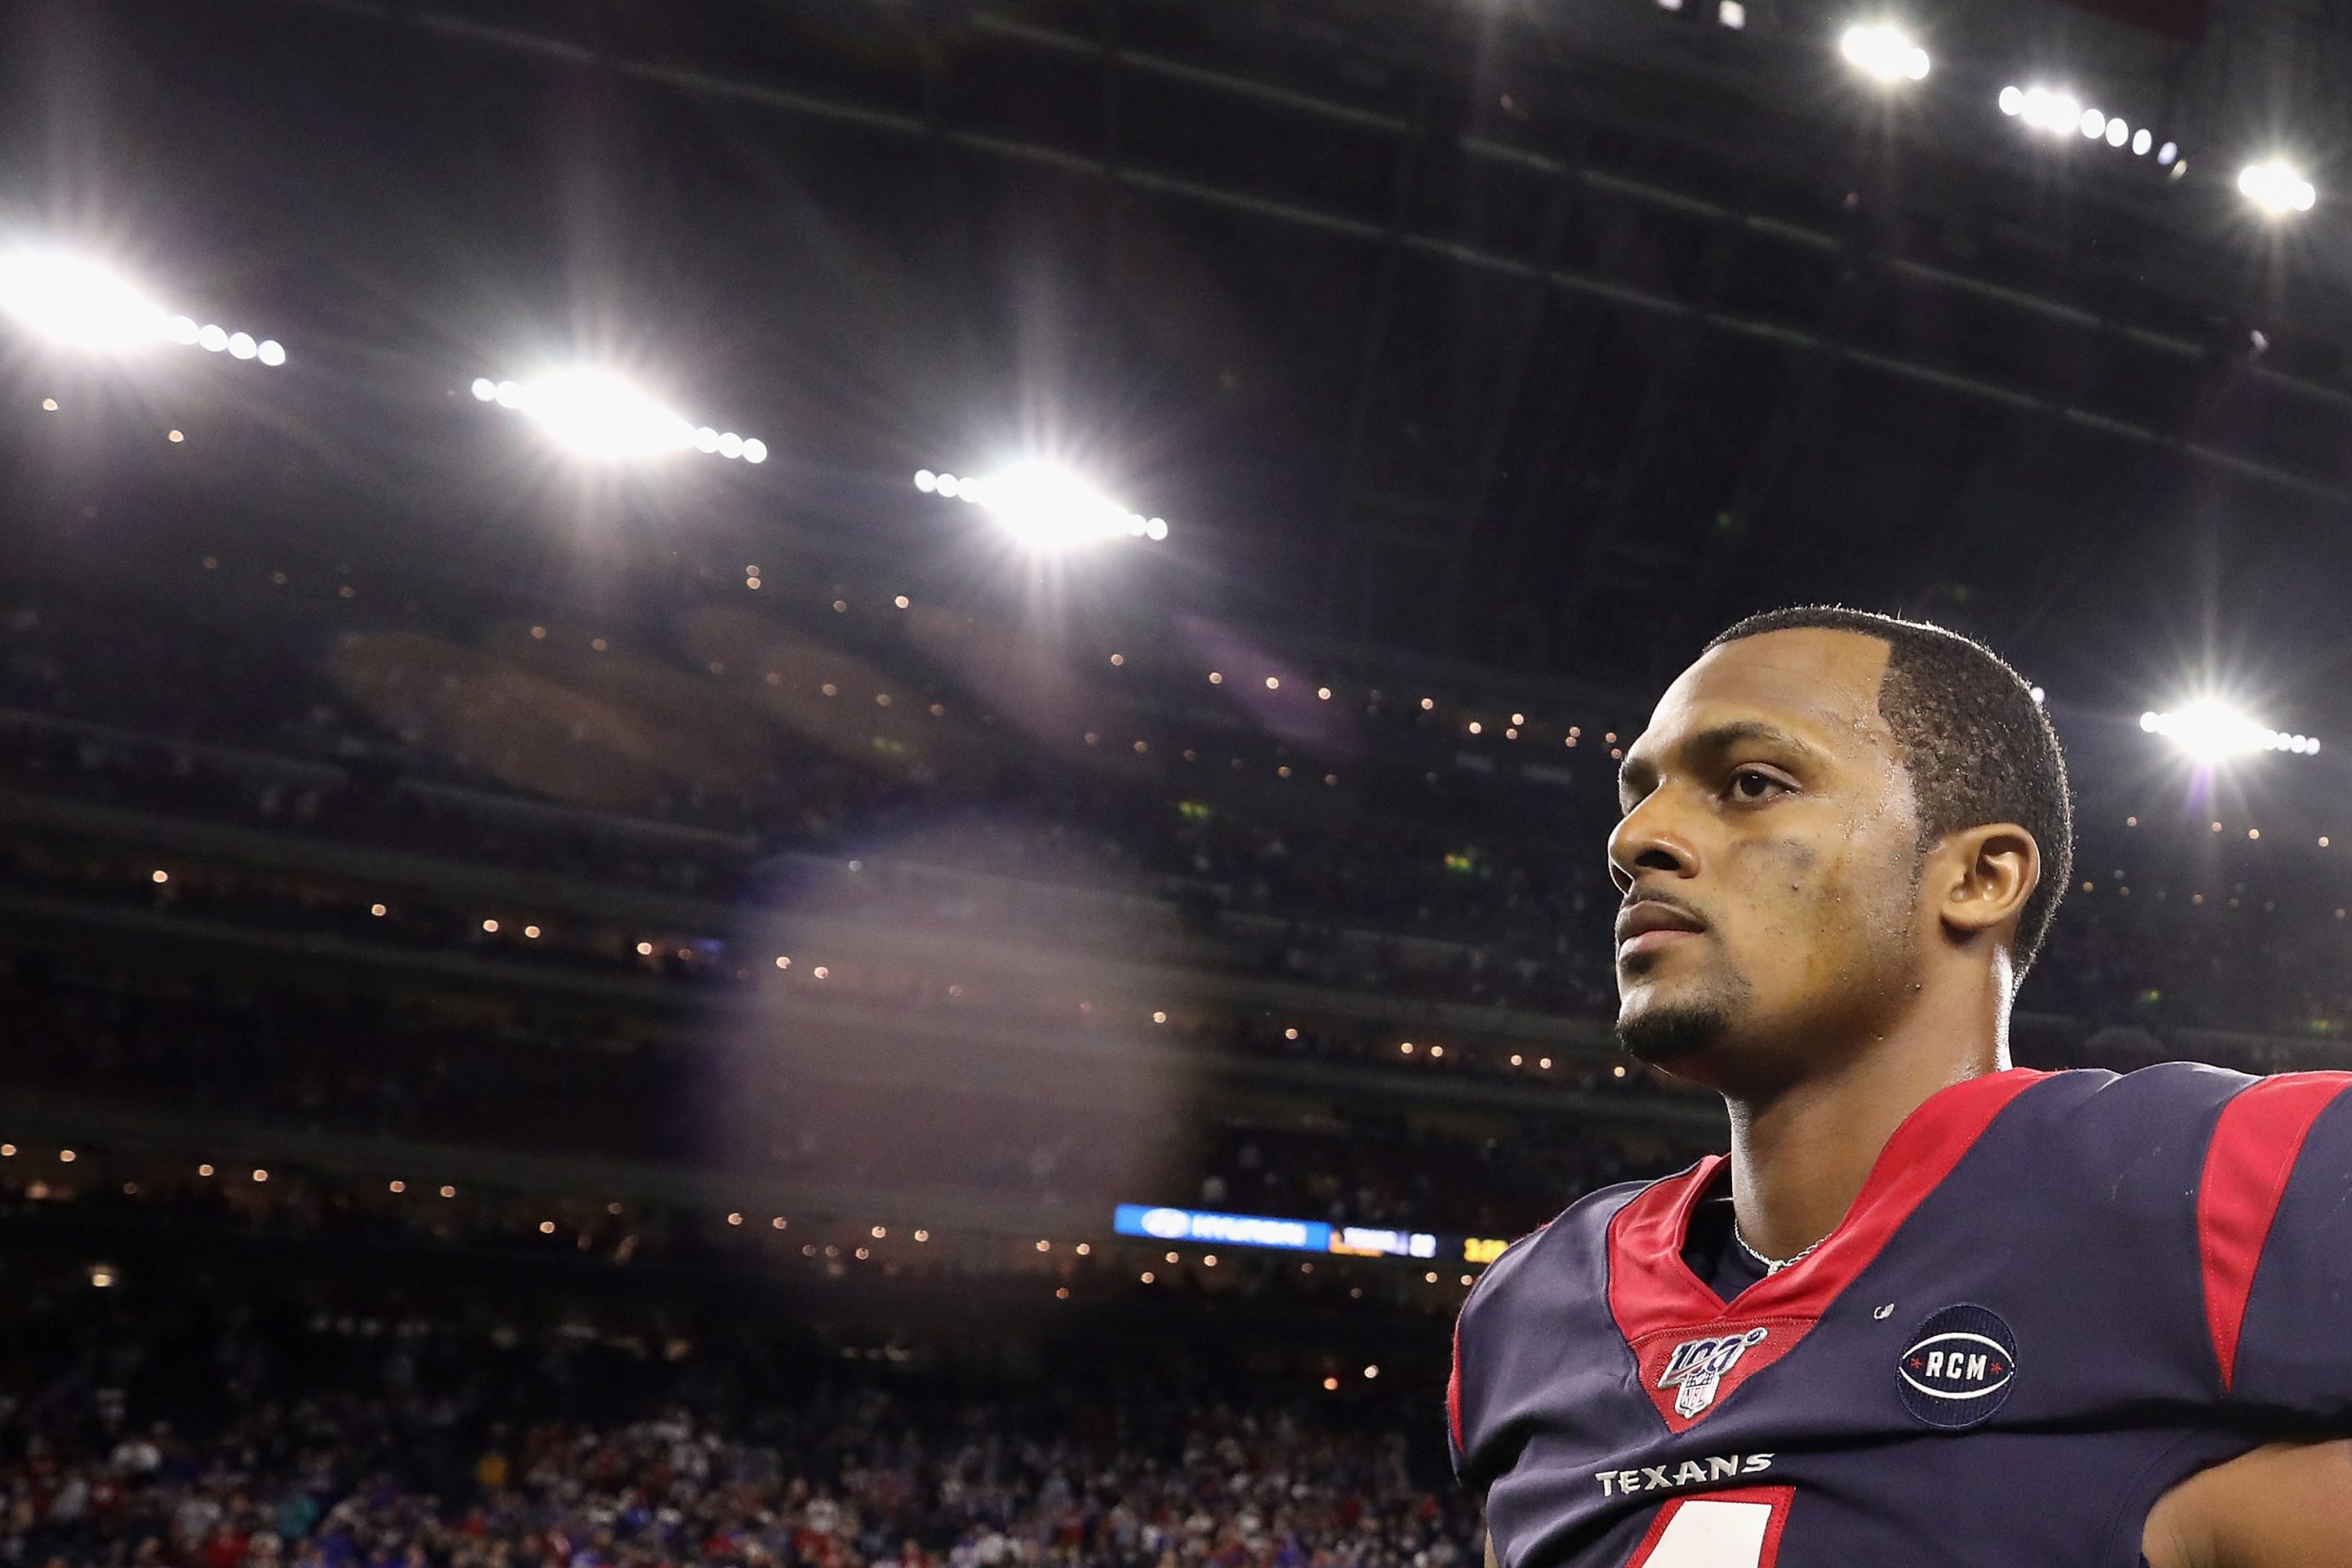 Quarterback Deshaun Watson #4 of the Houston Texans walks off the field following the AFC Wild Card Playoff game against the Buffalo Bills at NRG Stadium on January 04, 2020 in Houston, Texas. Watson is dressed in his uniform. In the background are stadium lights and fans.